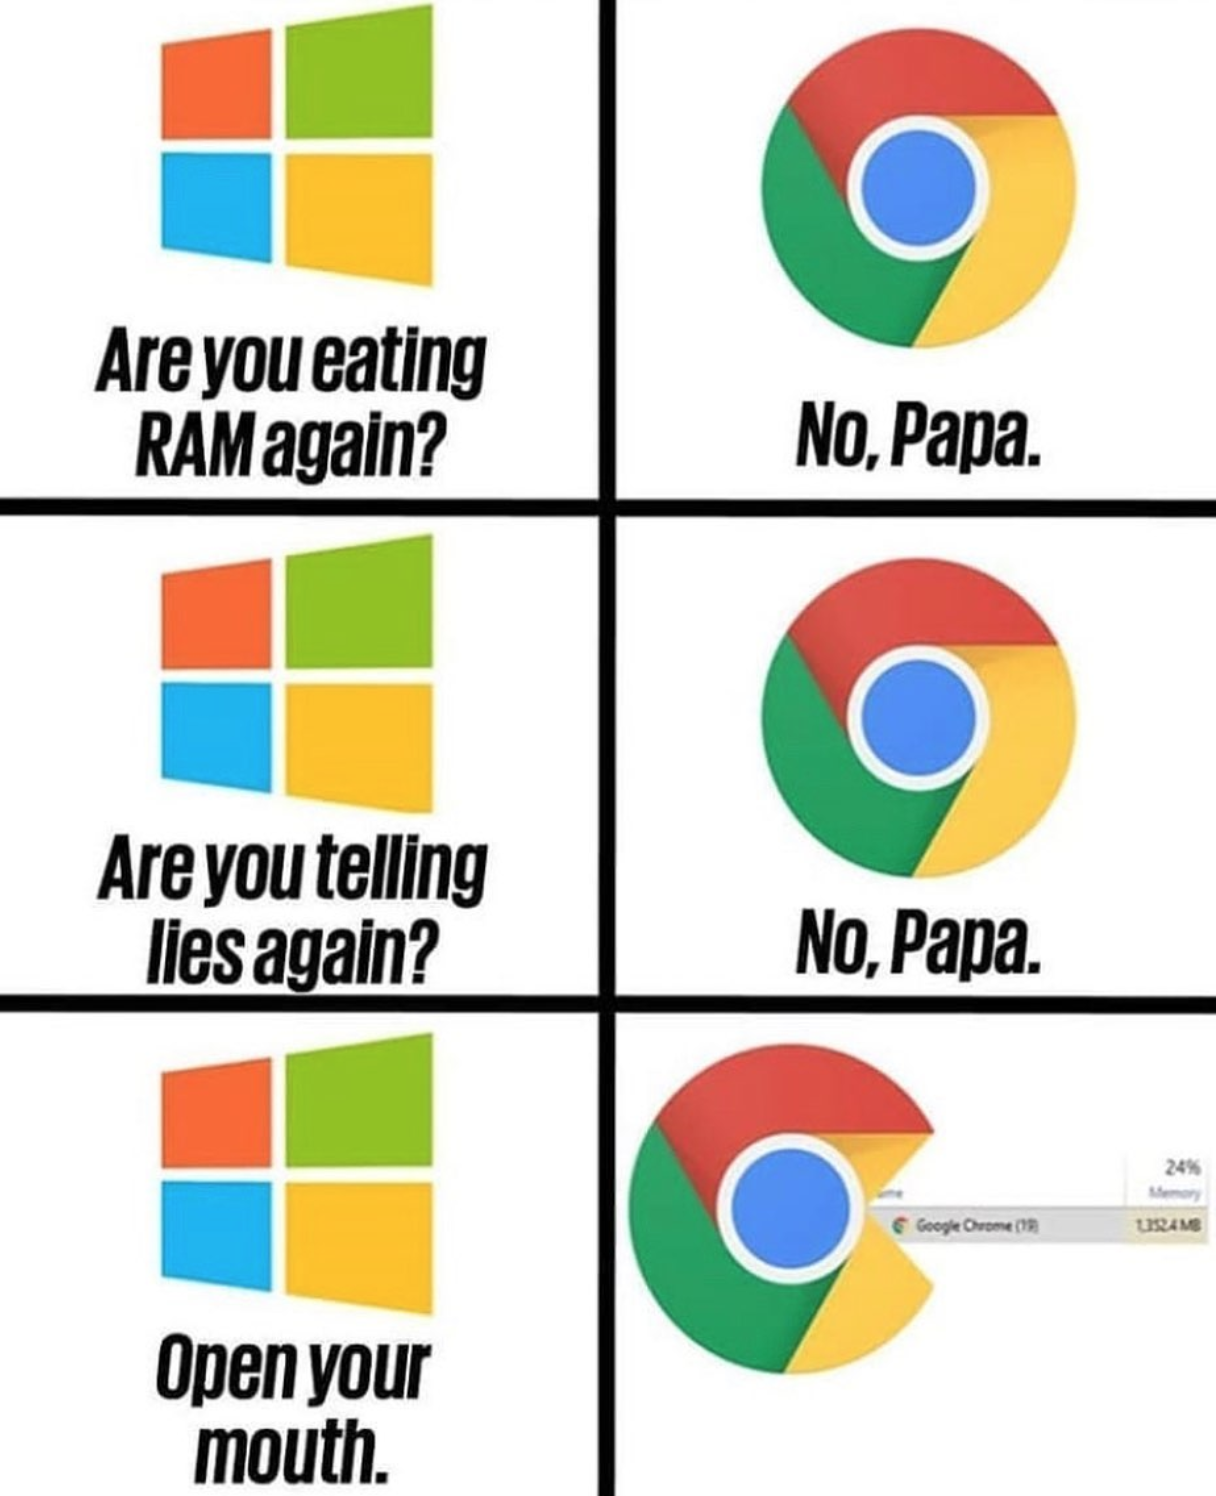 funny gaming memes - chrome are you eating ram - Are you eating Ram again? No, Papa. Are you telling lies again? No, Papa. Open your mouth.